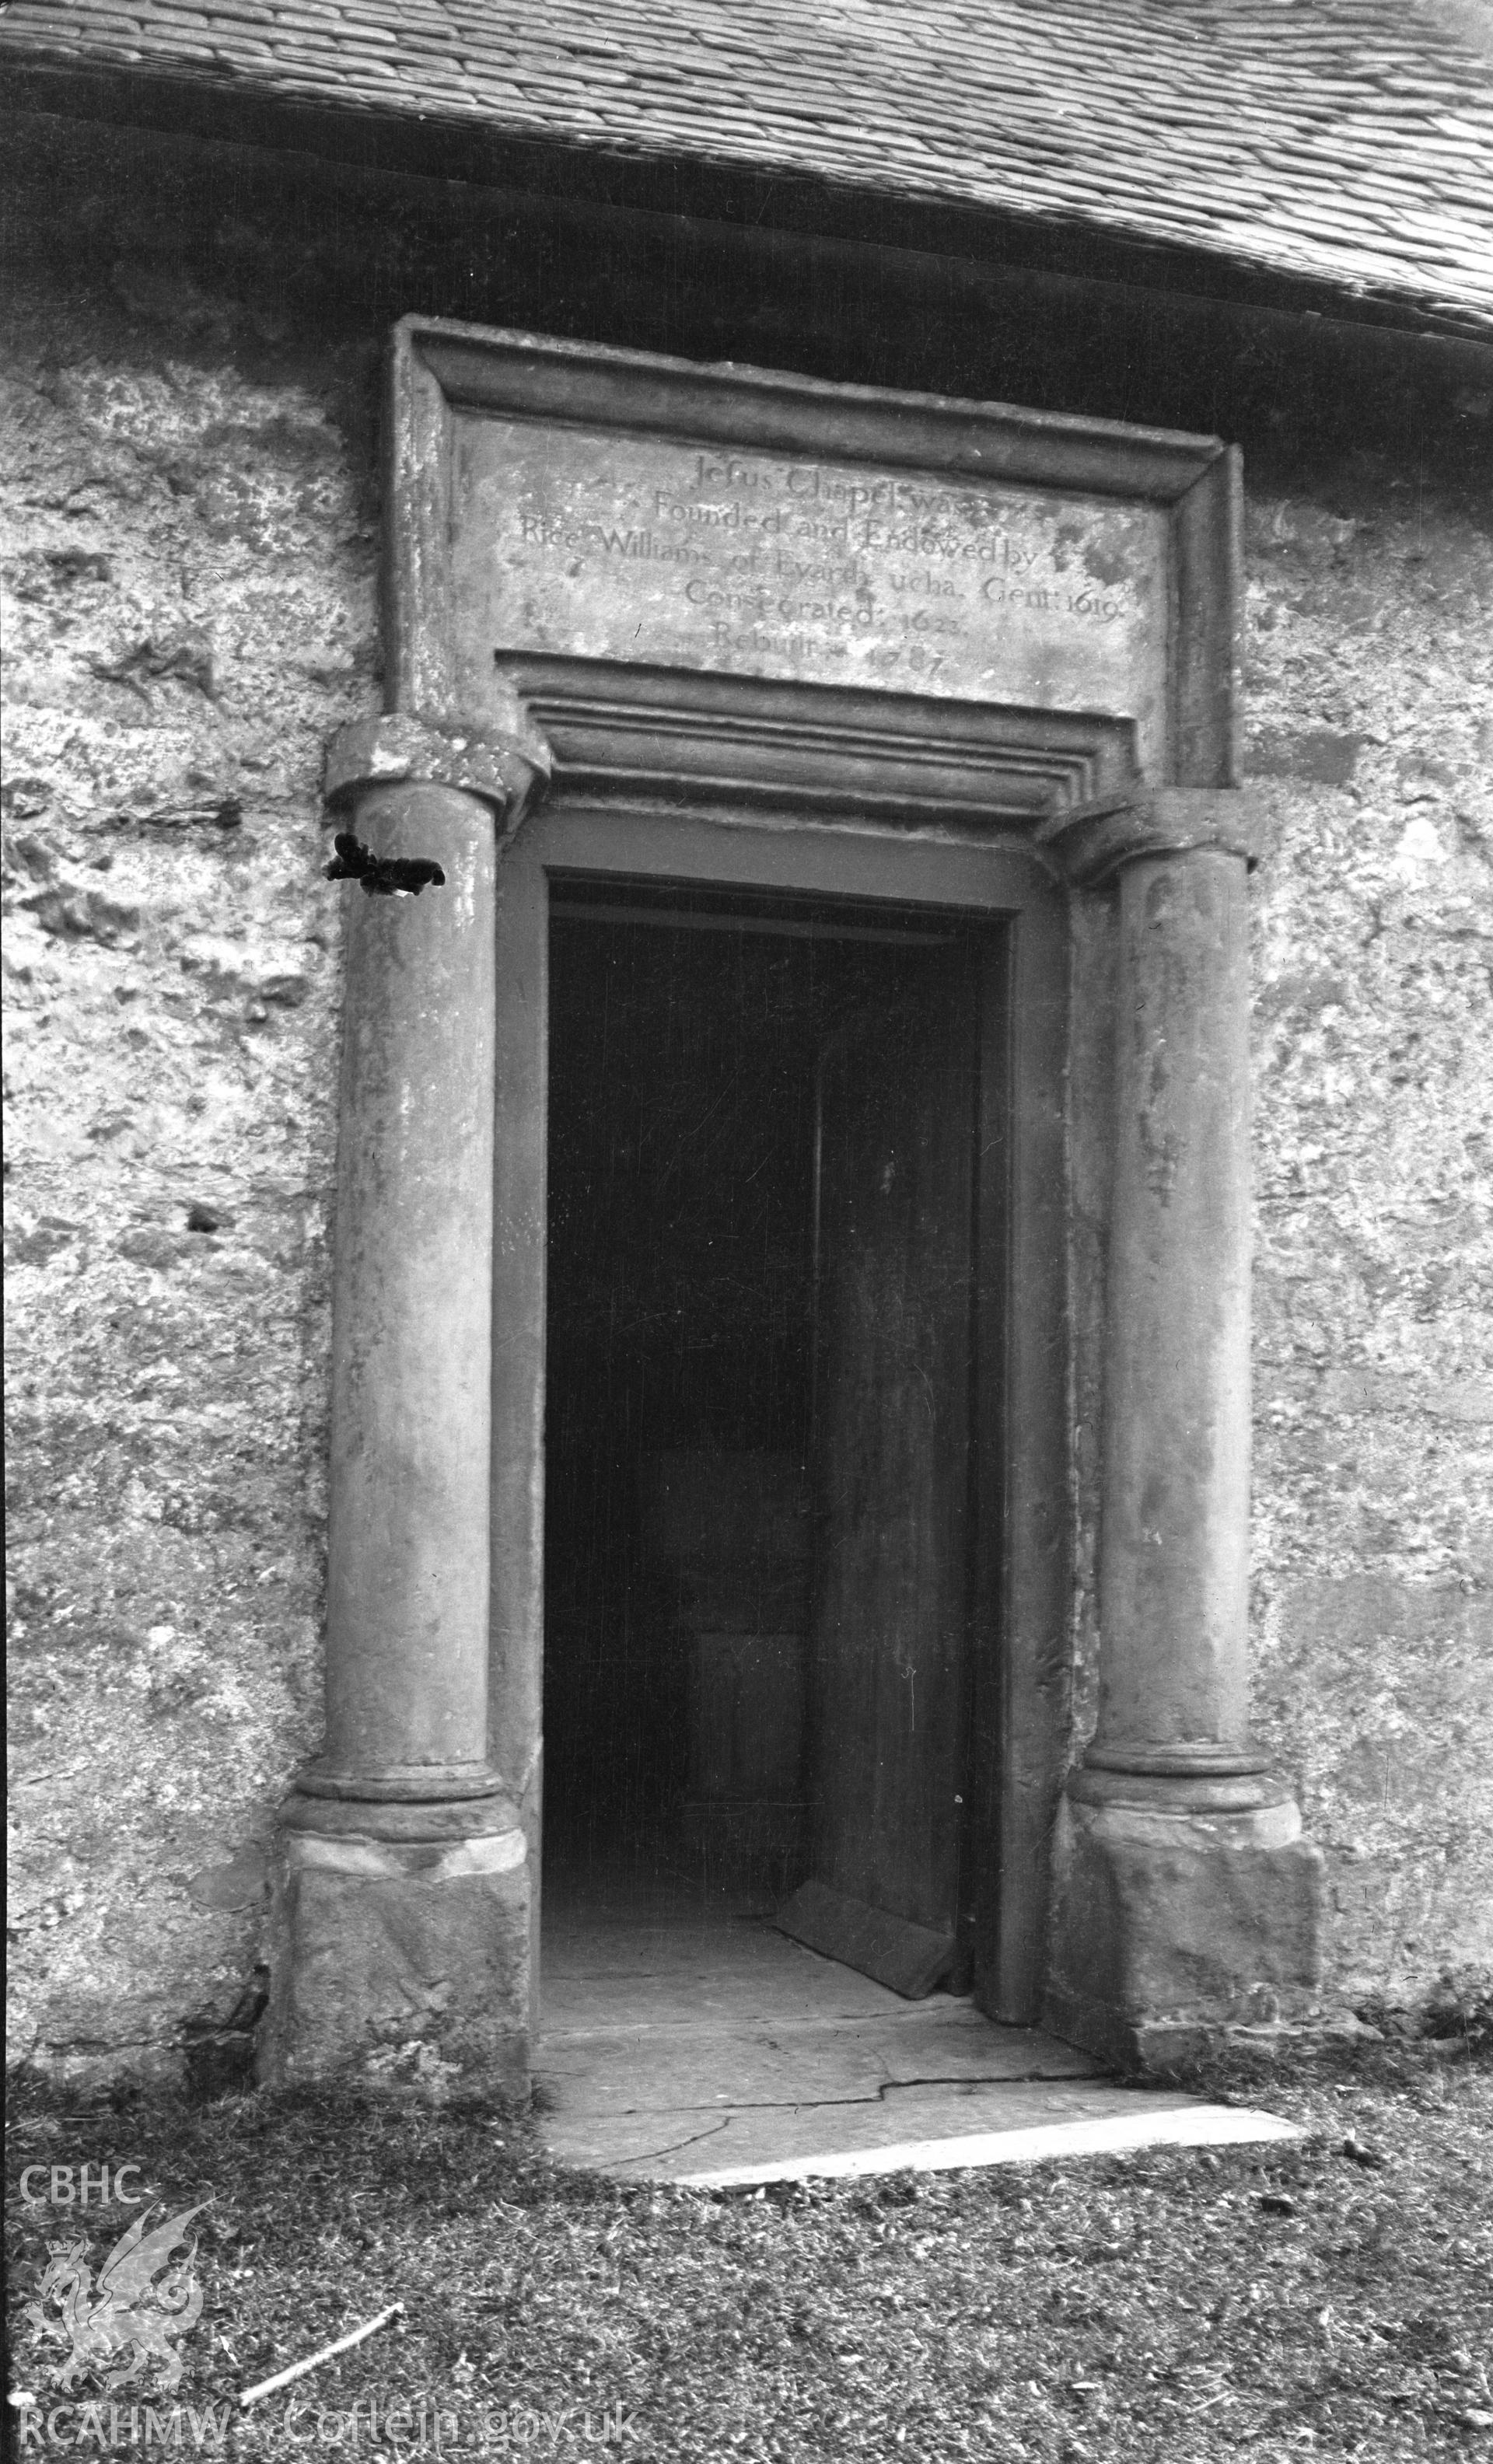 Black and white nitrate negative showing exterior view of Jesus Chapel, Llanfair.